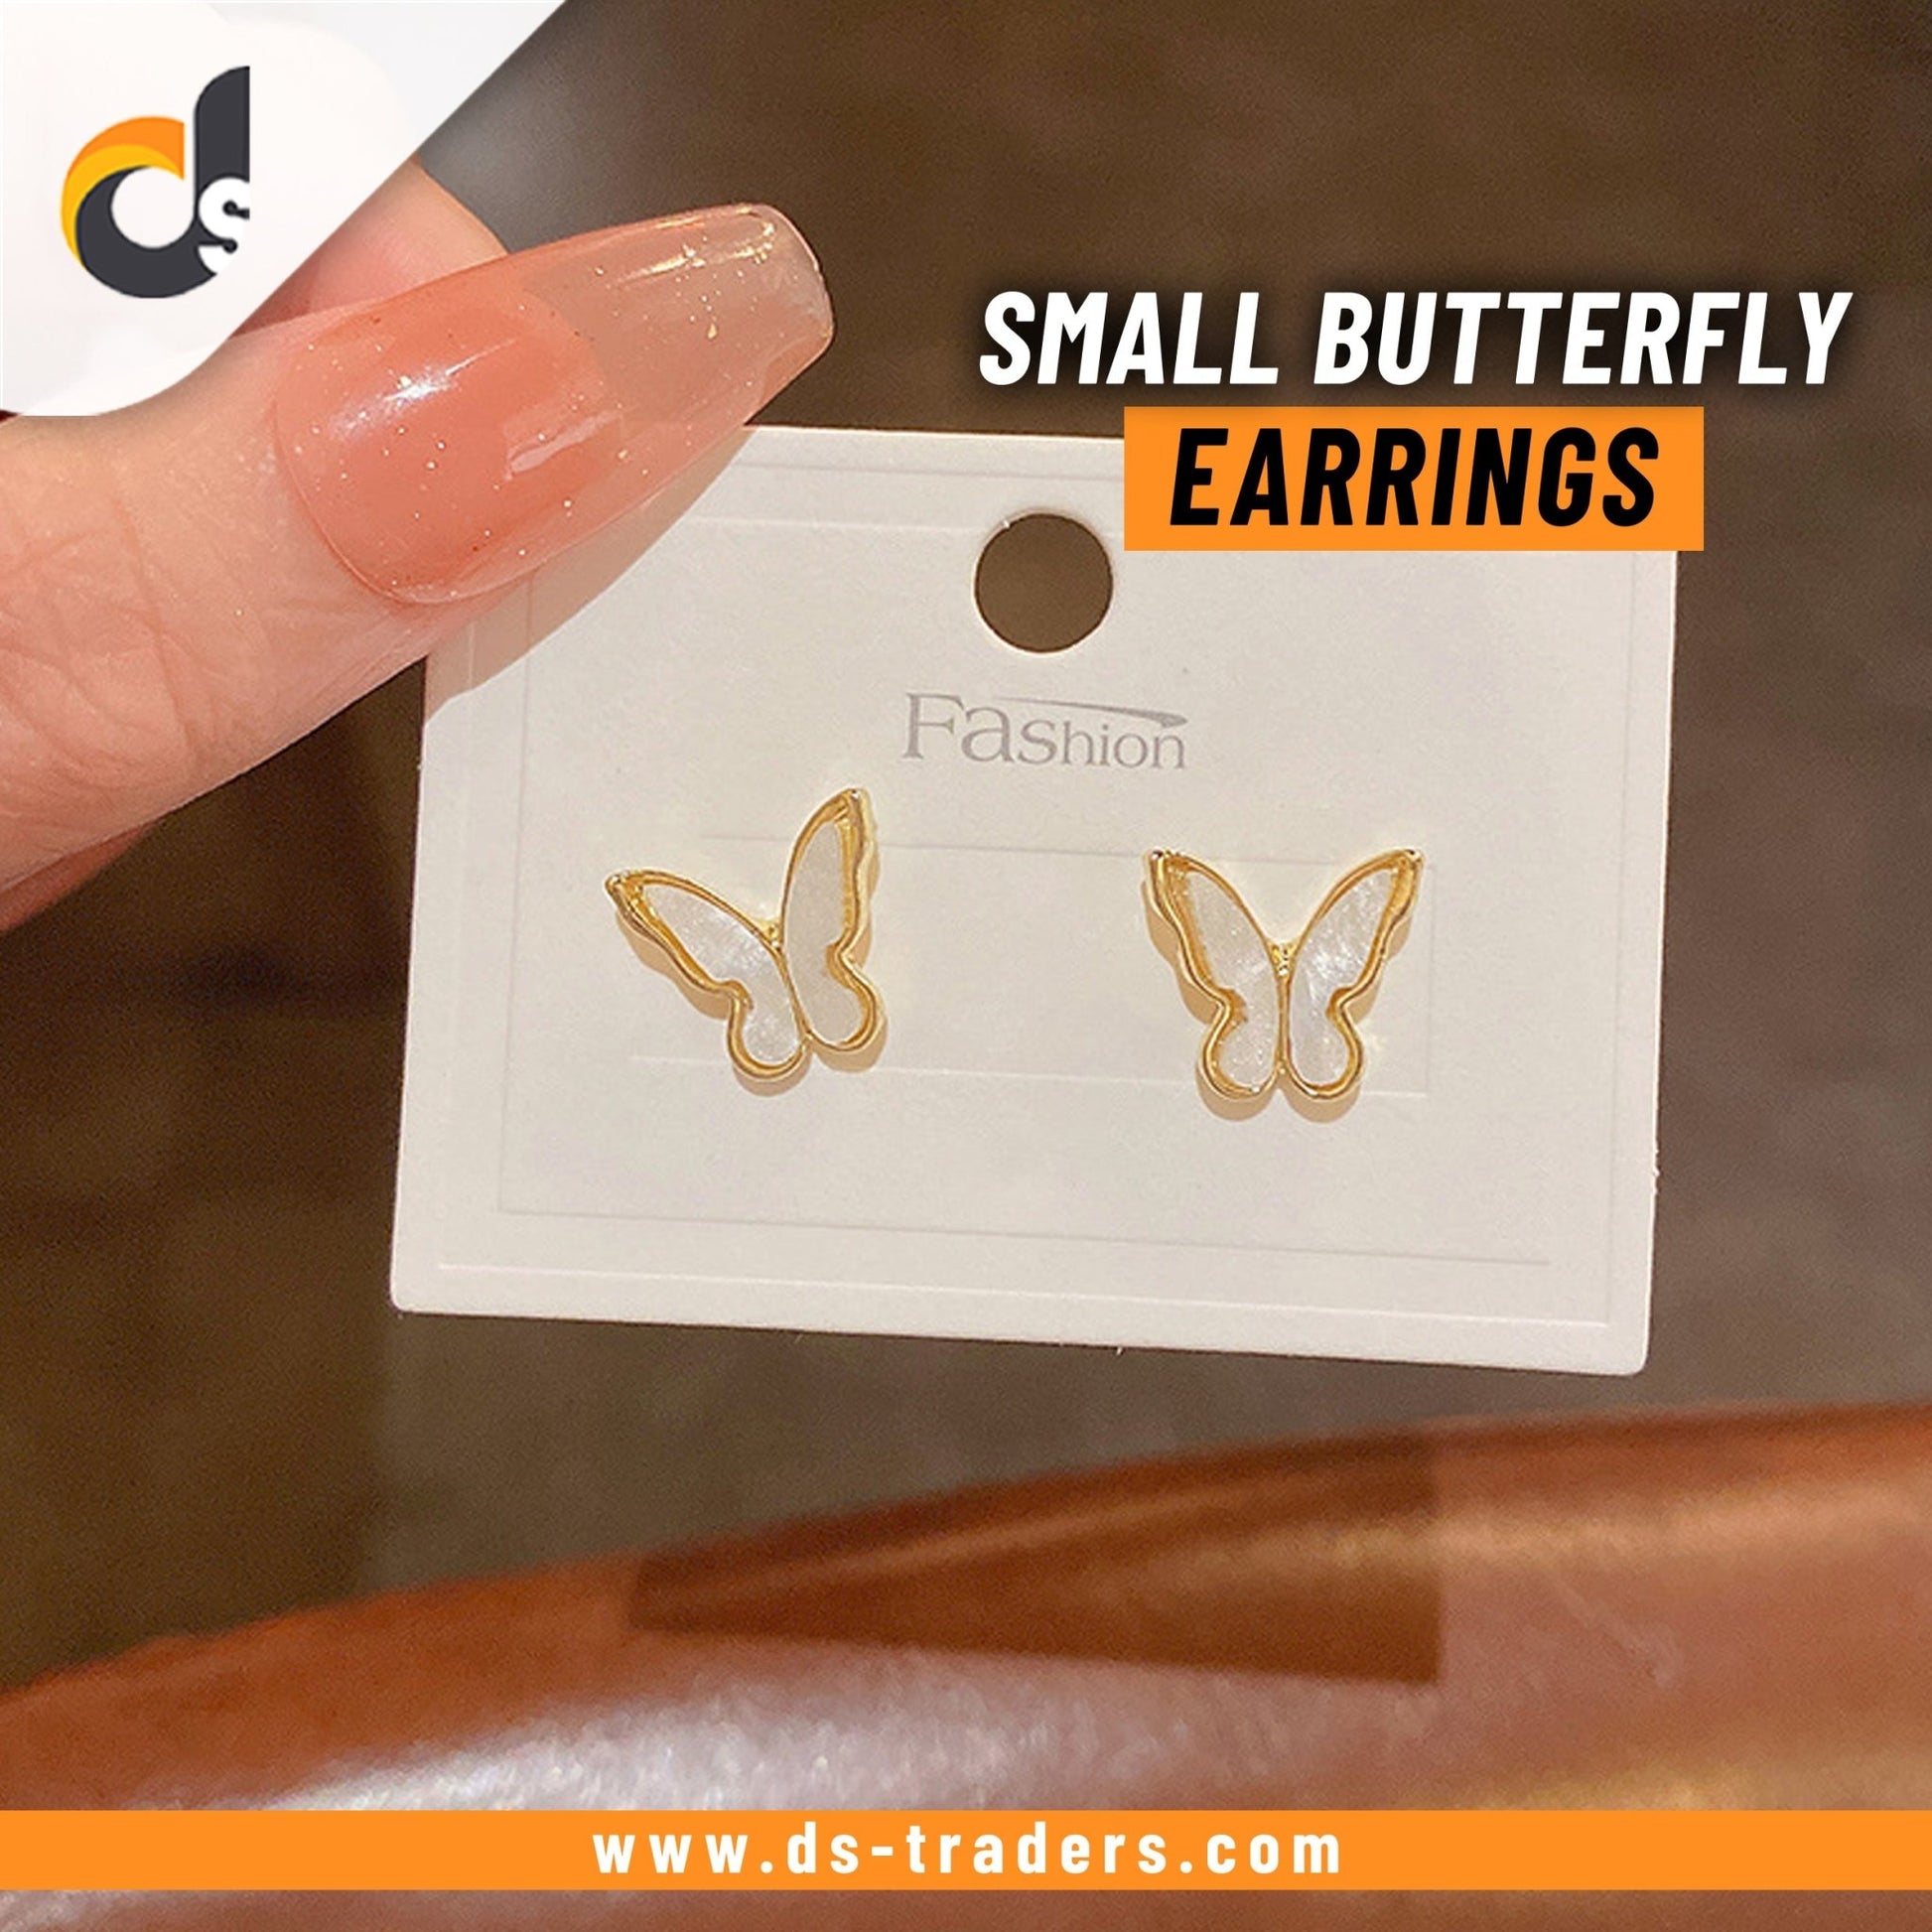 Small Butterfly Earrings - DS Traders